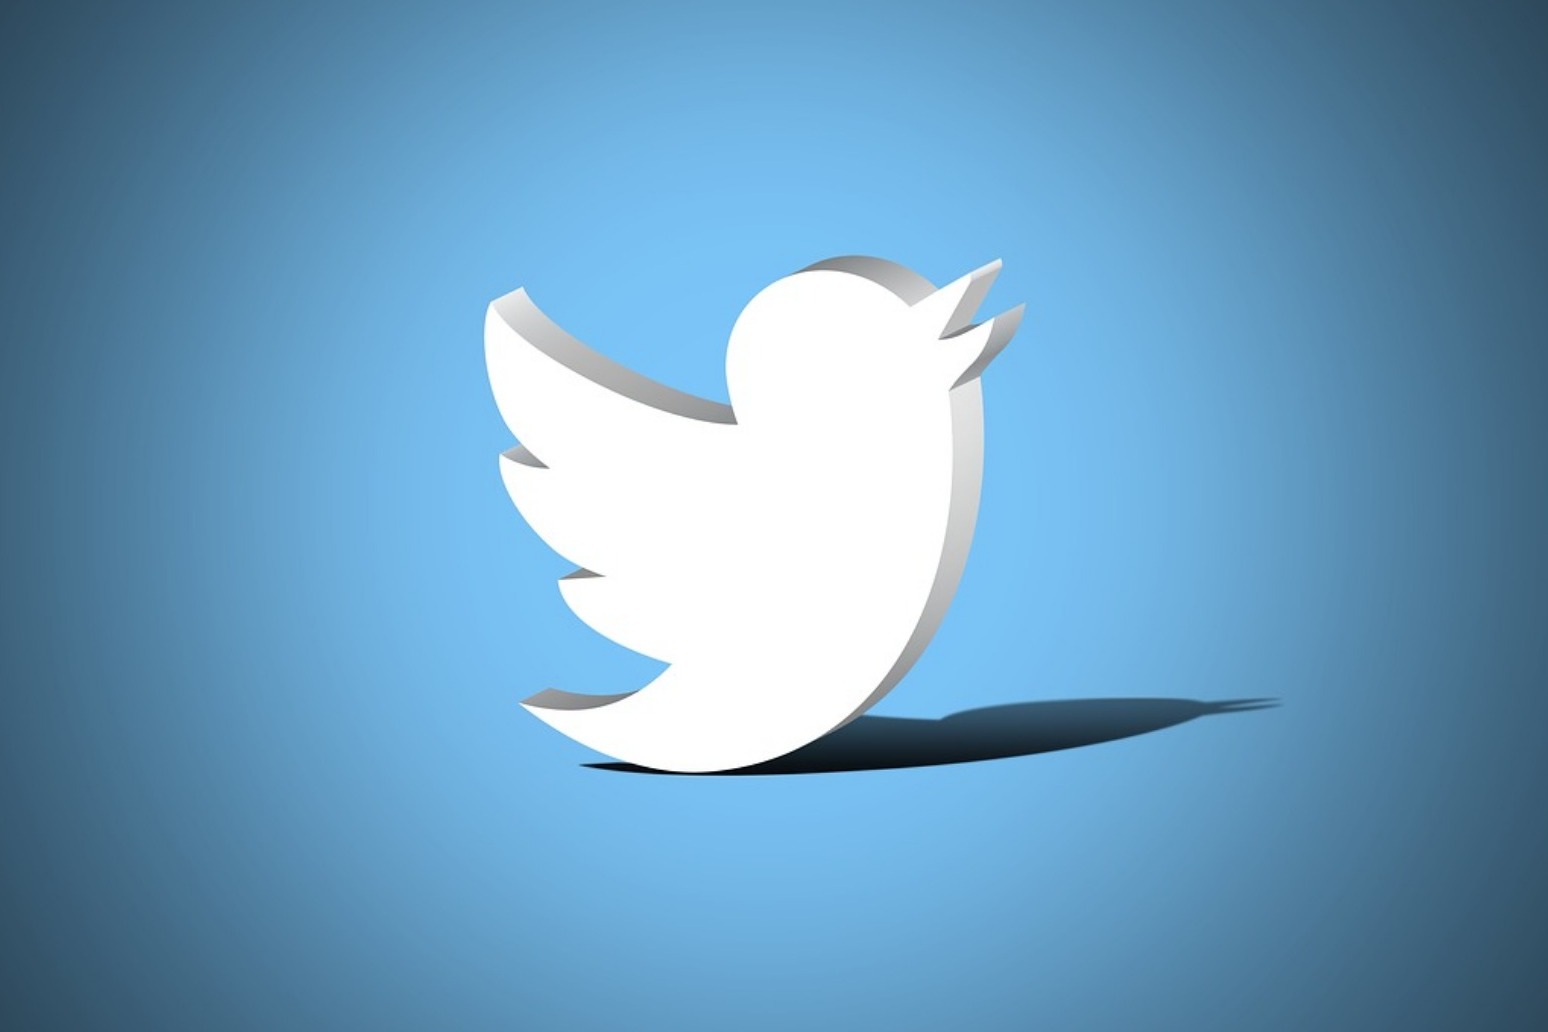 Some Twitter users urged to change passwords after glitch 